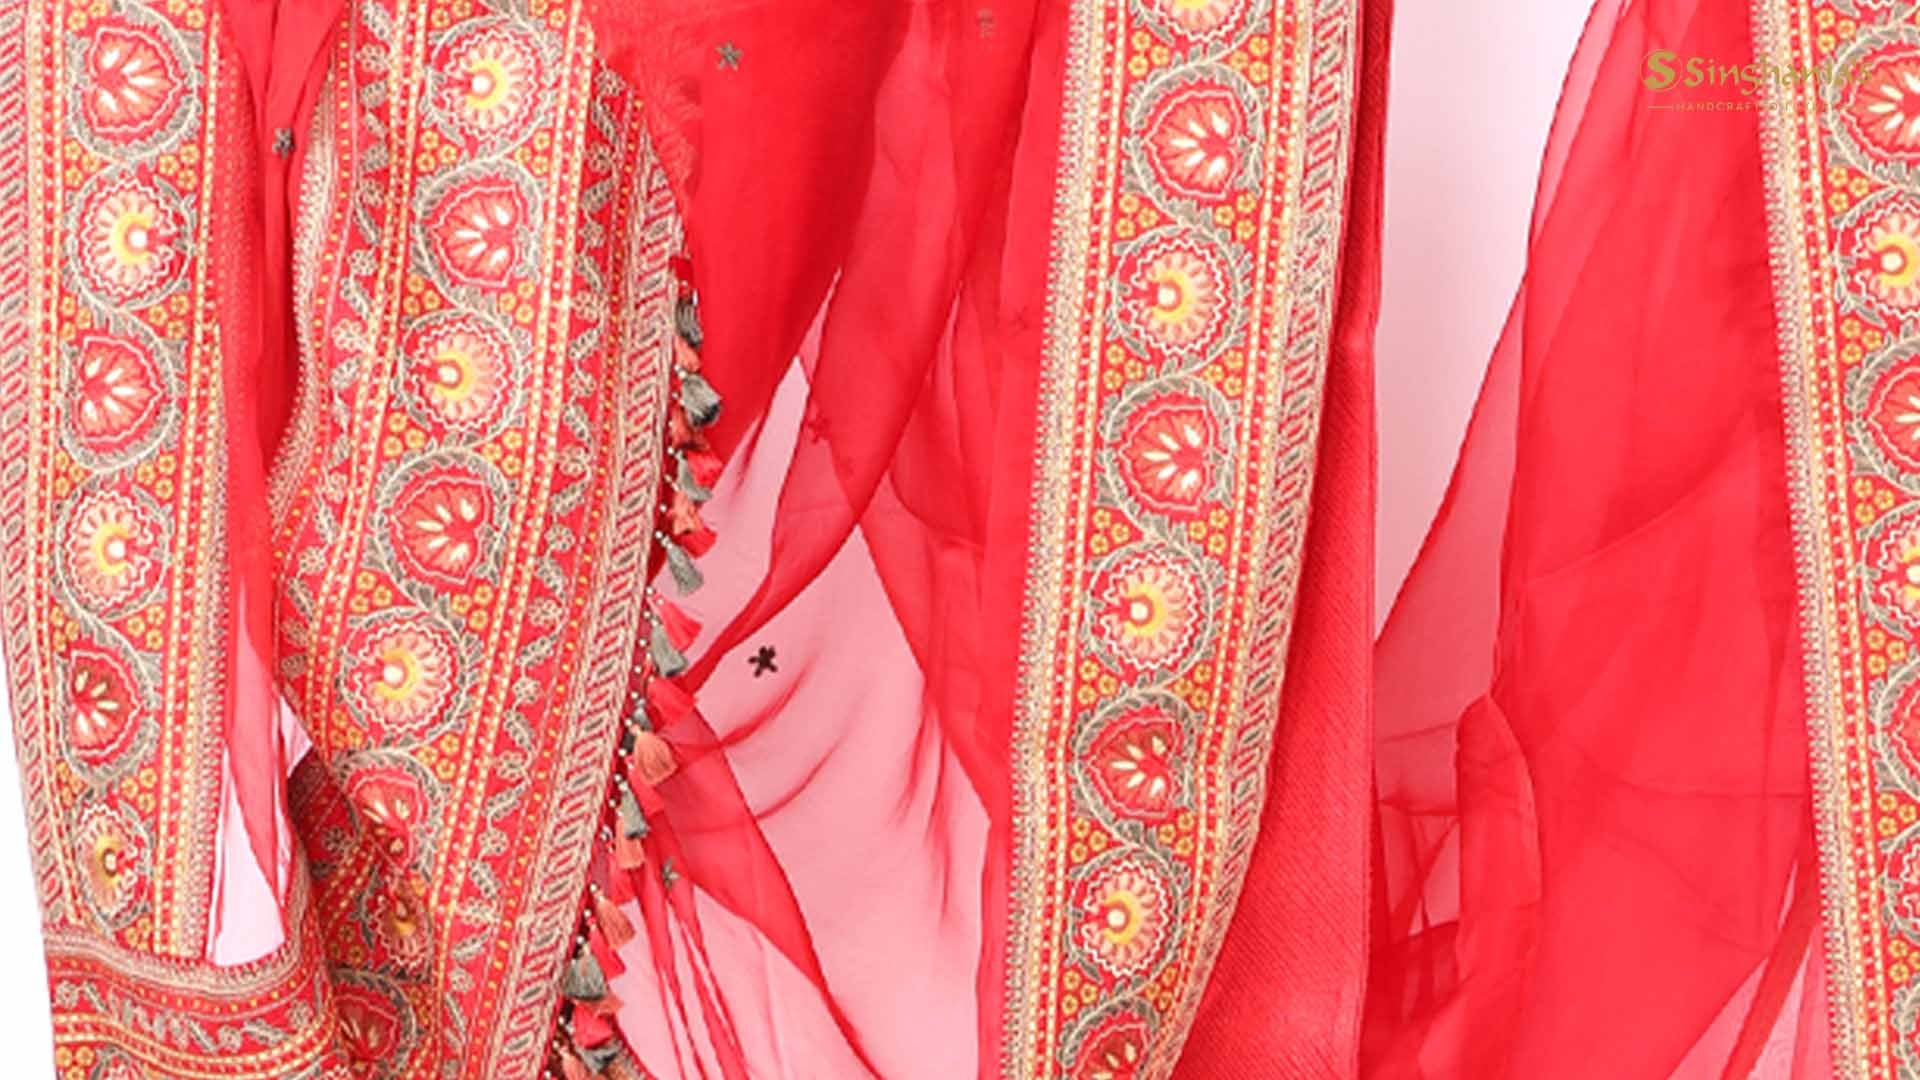 A COMPLETE STORY OF HAND-WORK EMBROIDERY SAREE